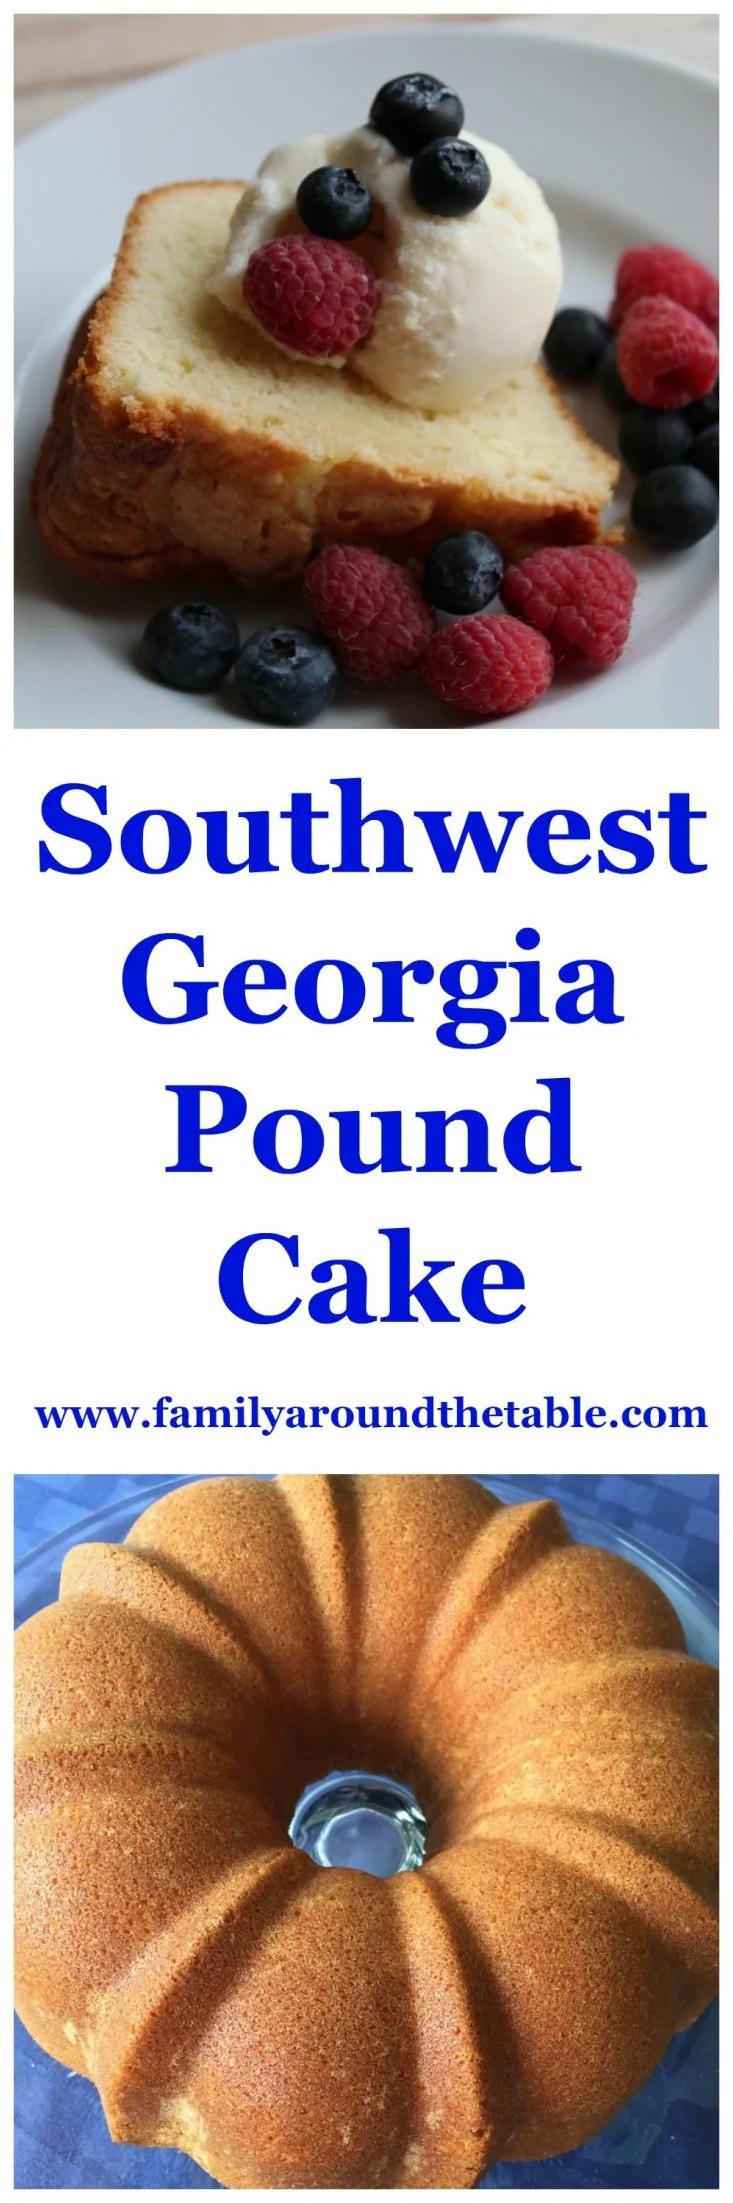  Say hello to your newest obsession: Southwest Georgia Pound Cake